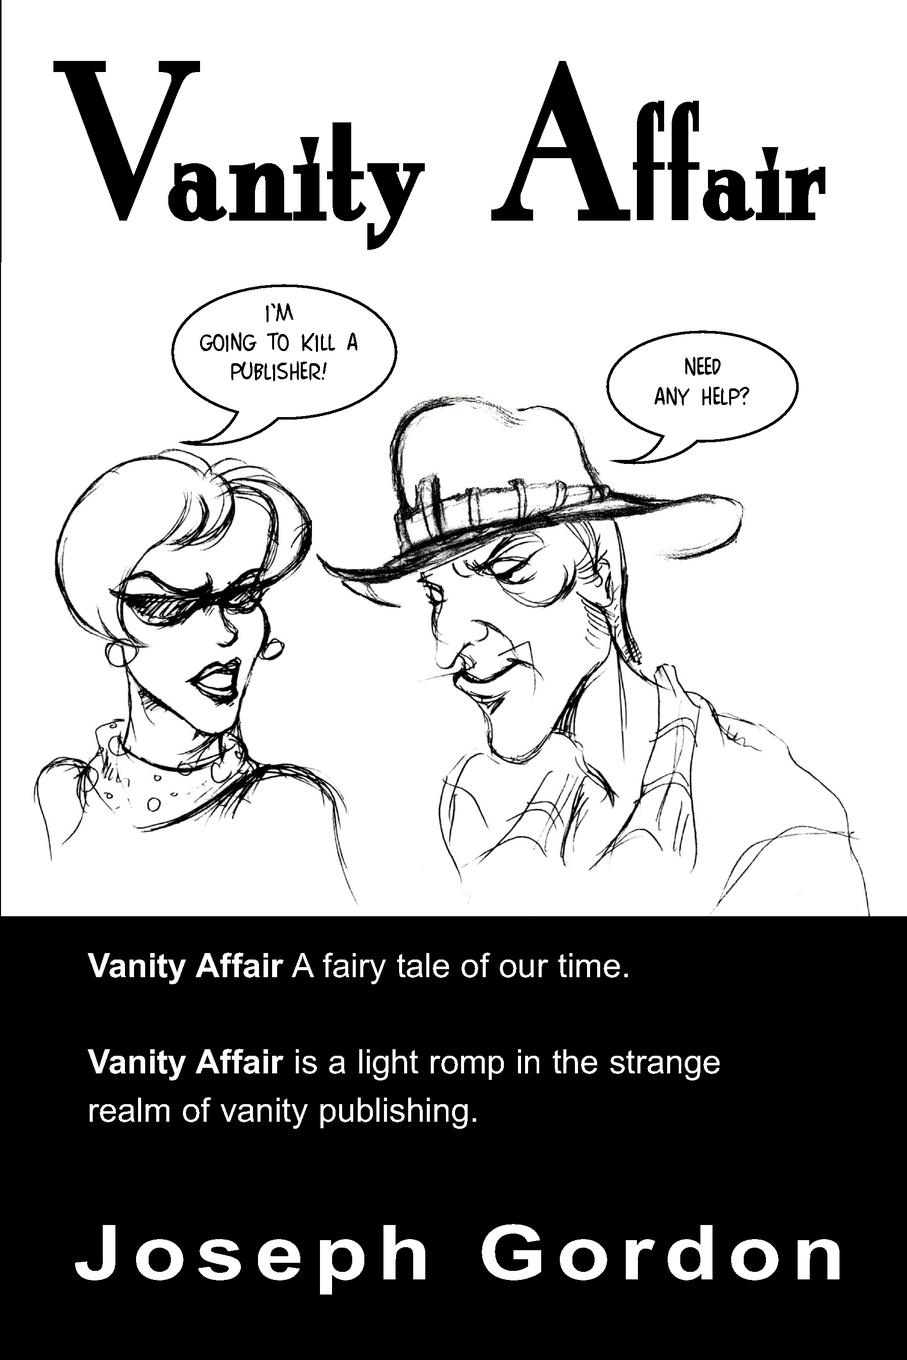 Vanity Affair. A Fairy Tale of Our Time. Vanity Affair is a Light Romp in the Strange Realm of Vanity Publishing.